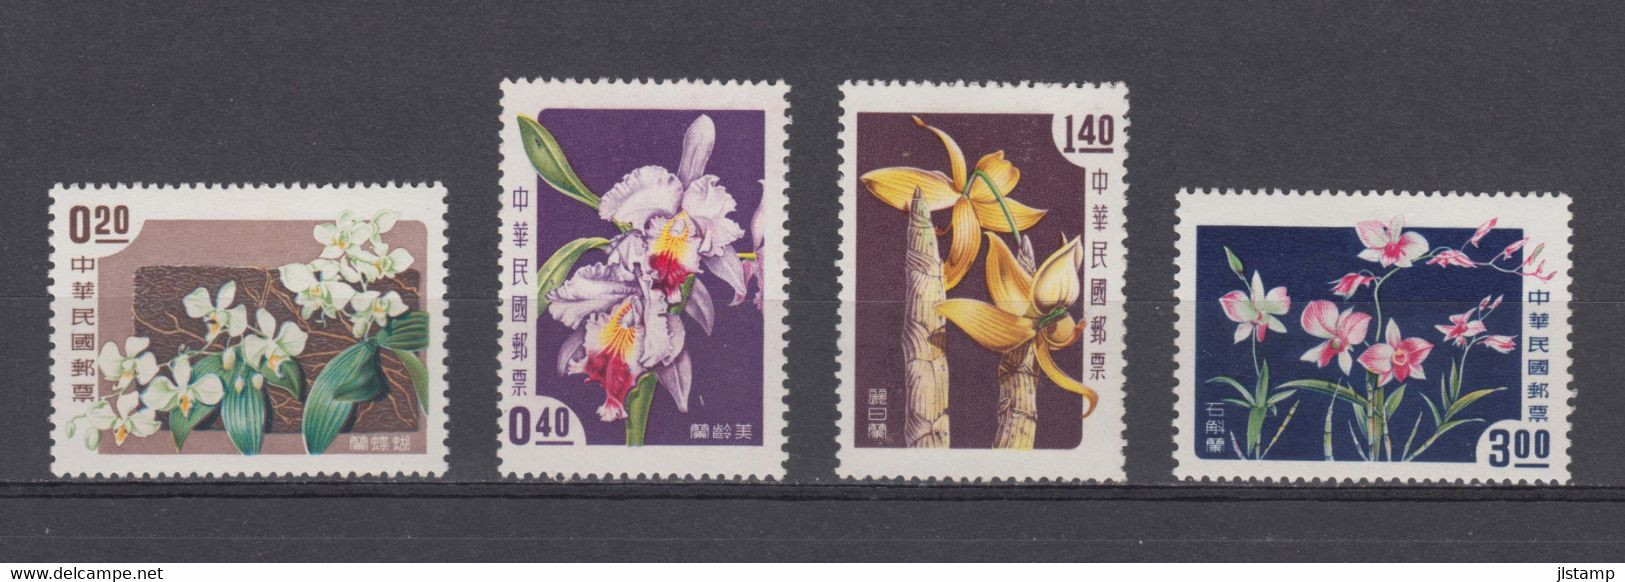 China Taiwan 1958 Orchids Flowes Stamp Set,Scott# 1189-1192, MH,OG,VF - Neufs